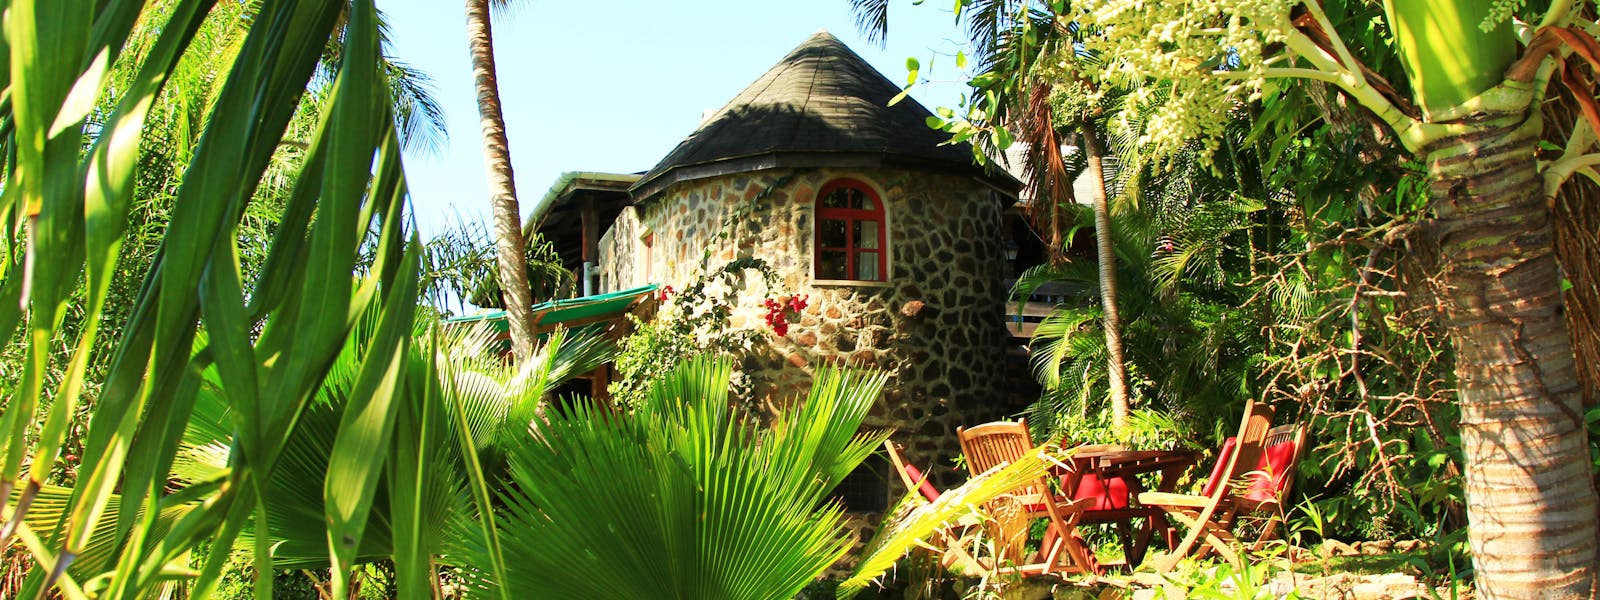 The Old Fort Manor House in the Grenadines